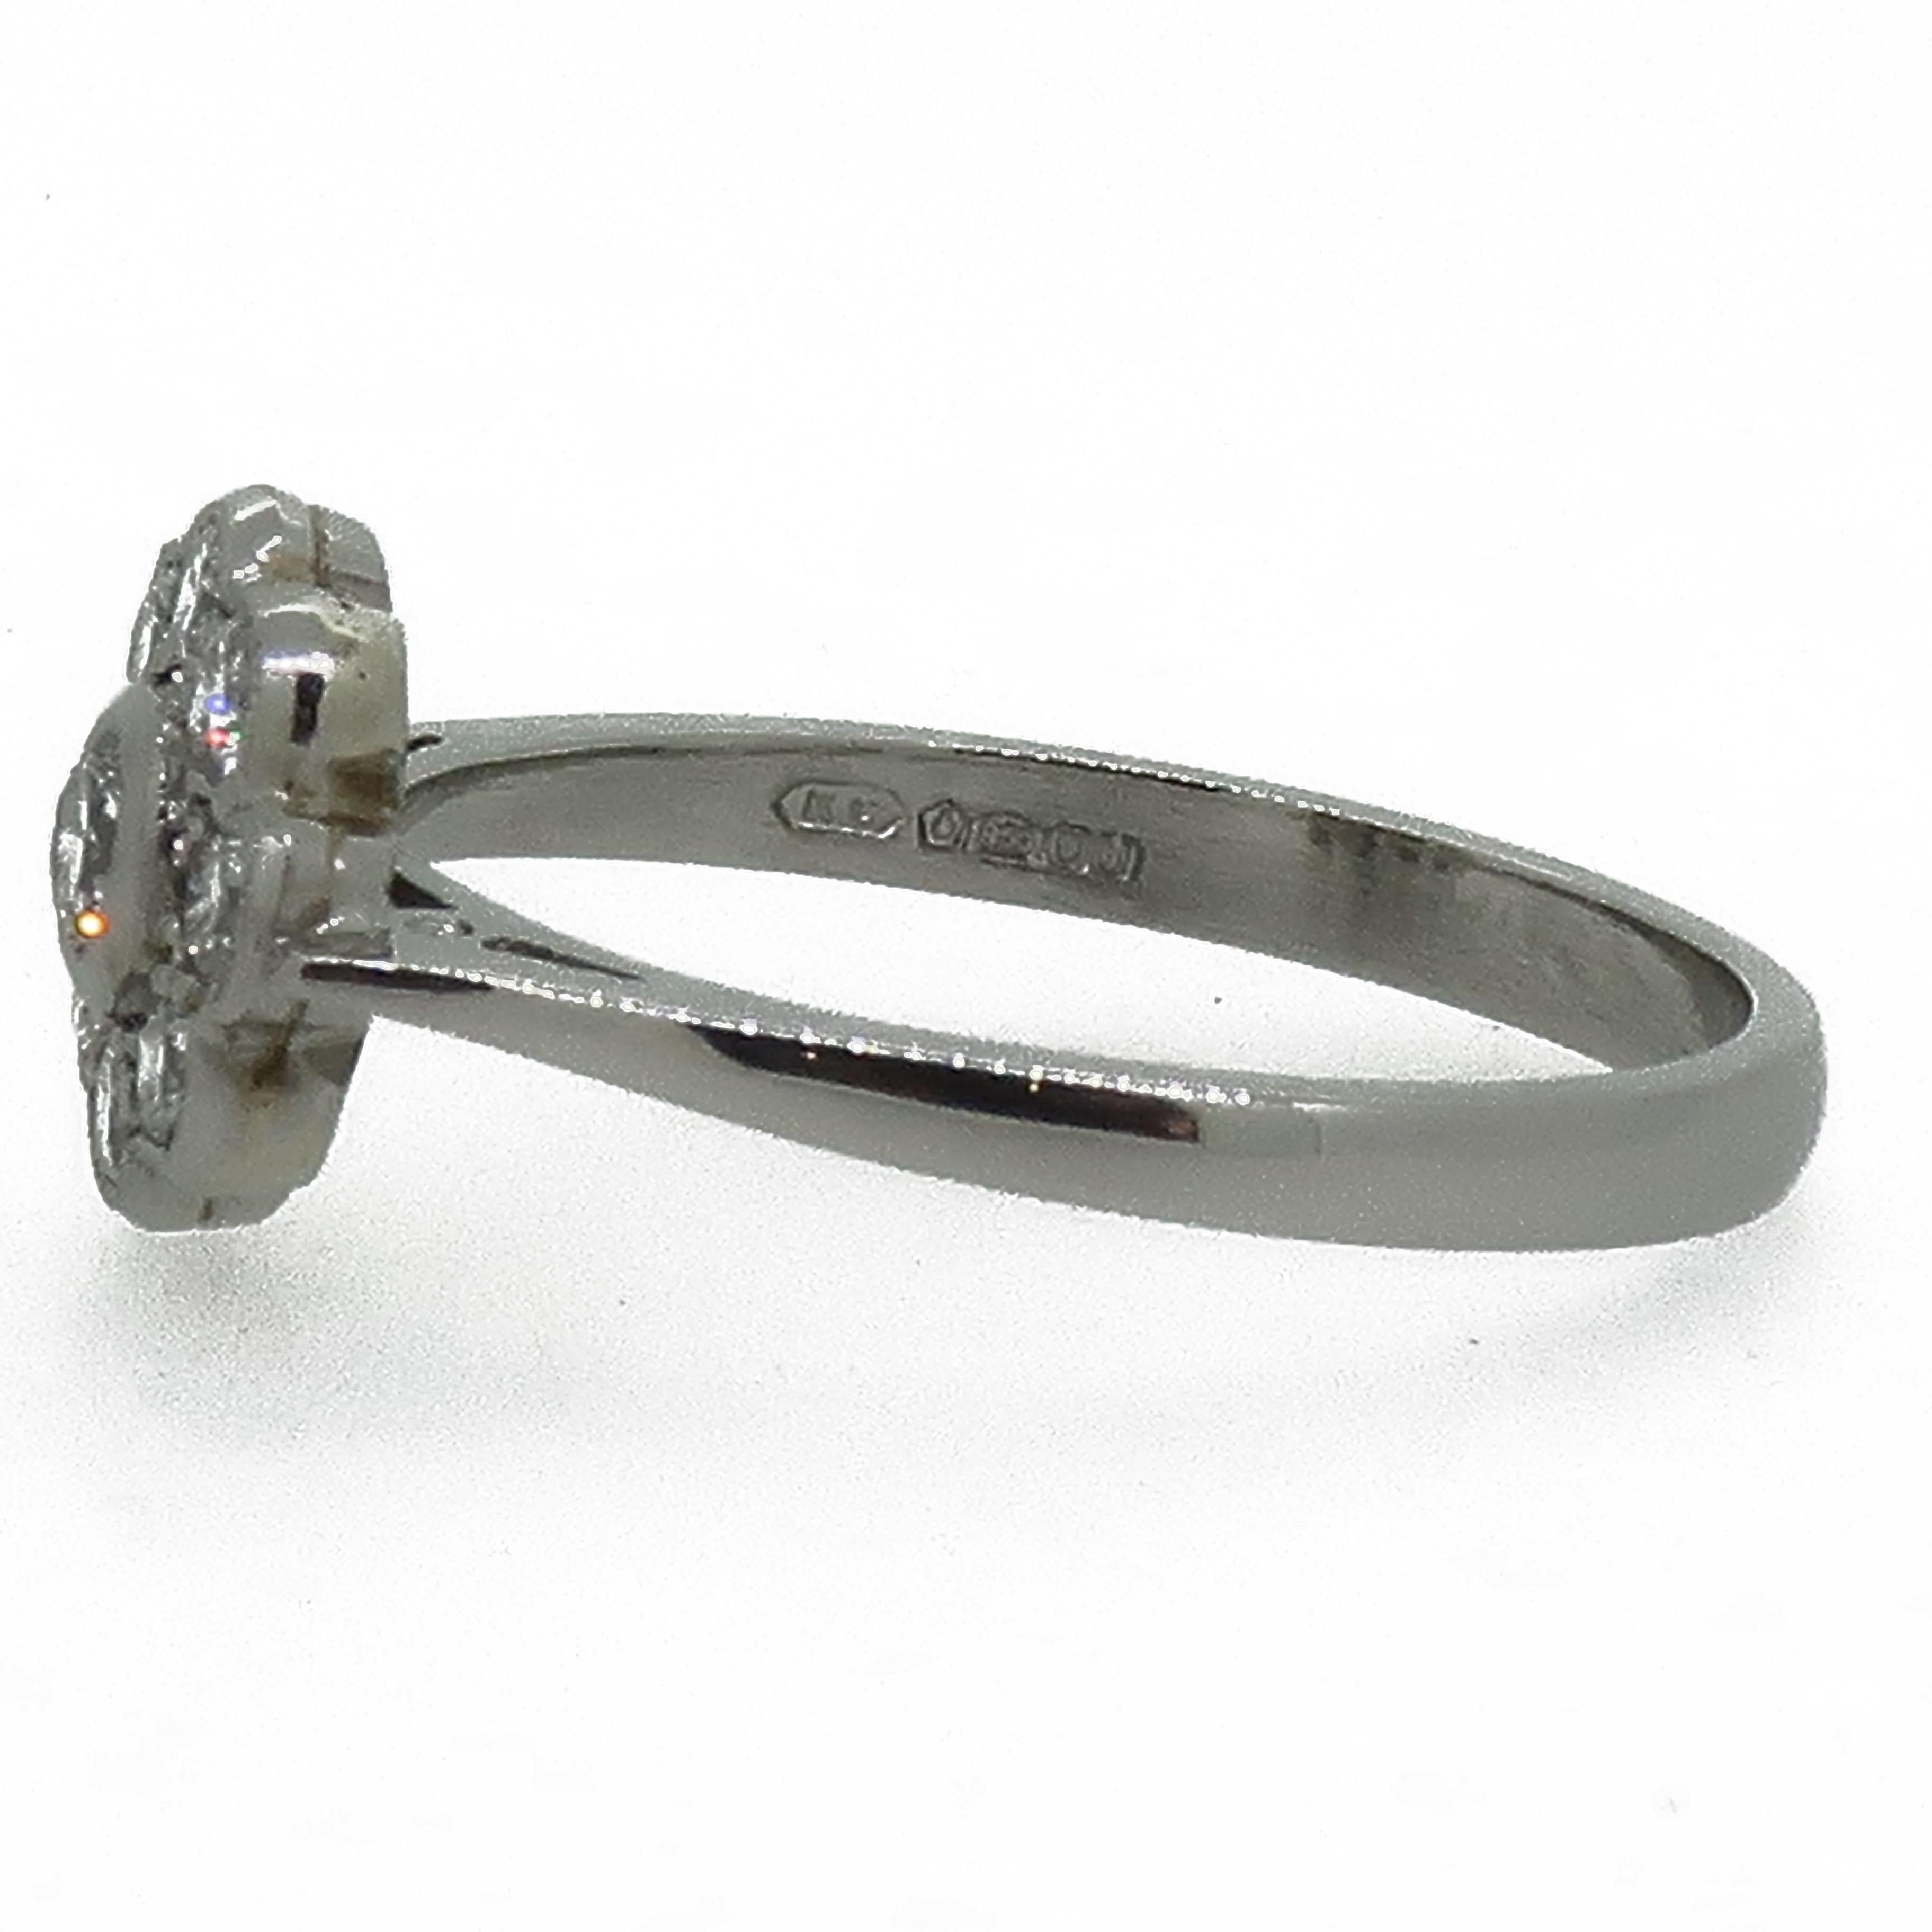 Platinum Diamond Art Deco Style Cluster Ring

A traditional style nine stone brilliant cut diamond cluster ring. Consisting of a slightly larger central stone, surrounded by a further eight brilliant cut diamonds, all delicately set in a grain